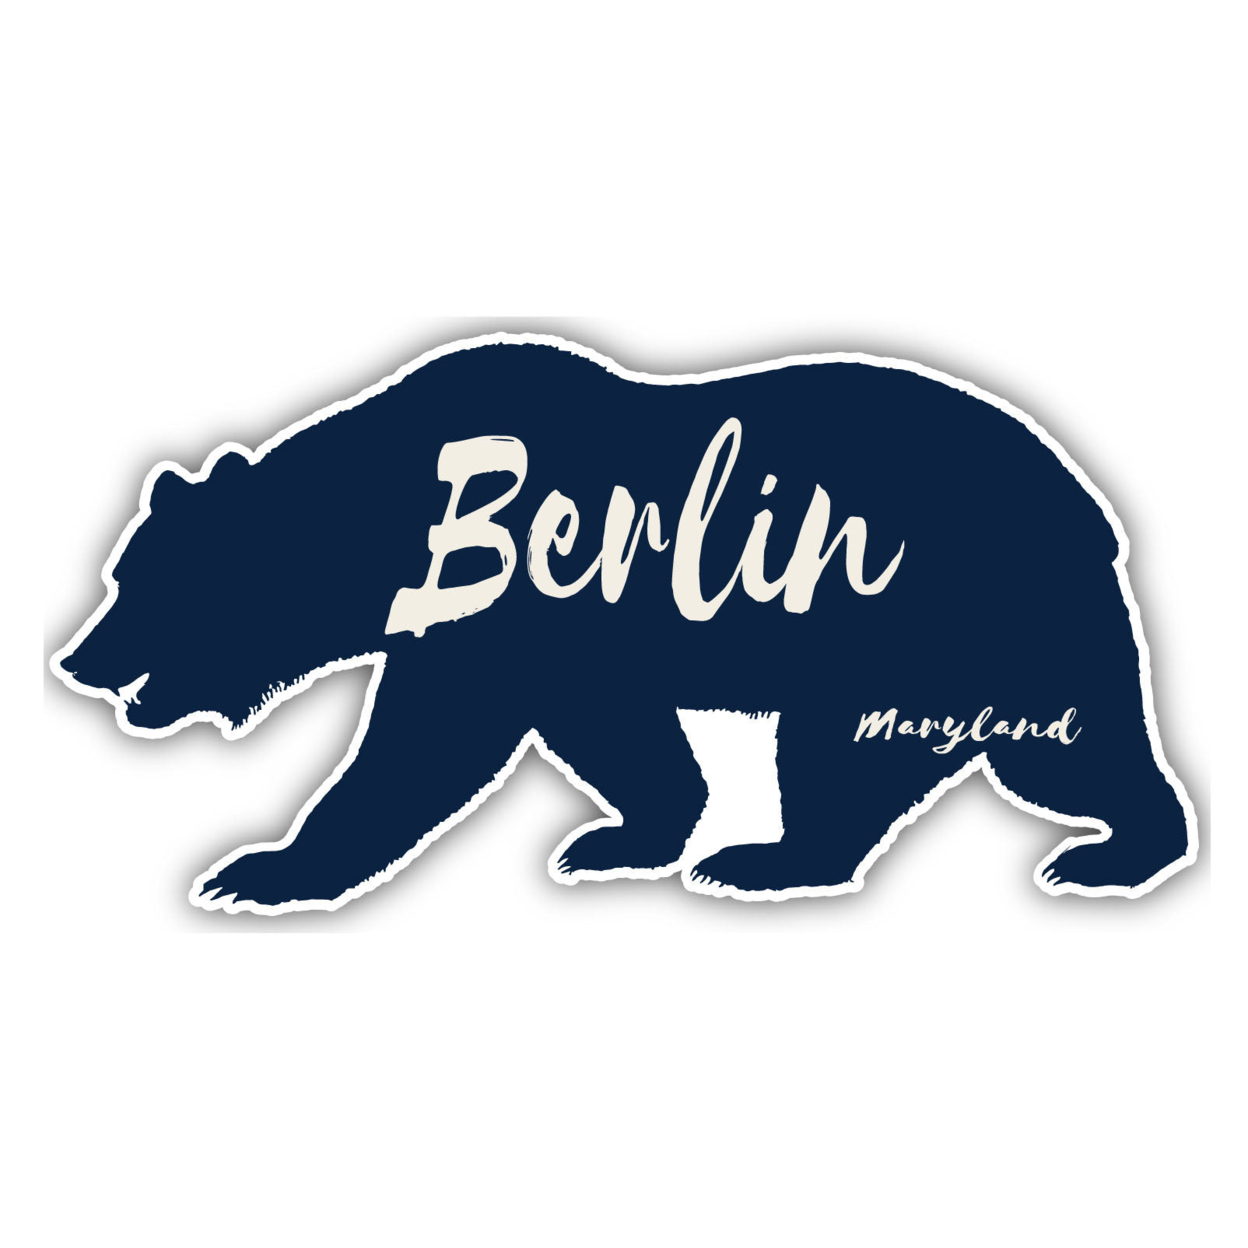 Berlin Maryland Souvenir Decorative Stickers (Choose Theme And Size) - 4-Pack, 2-Inch, Bear